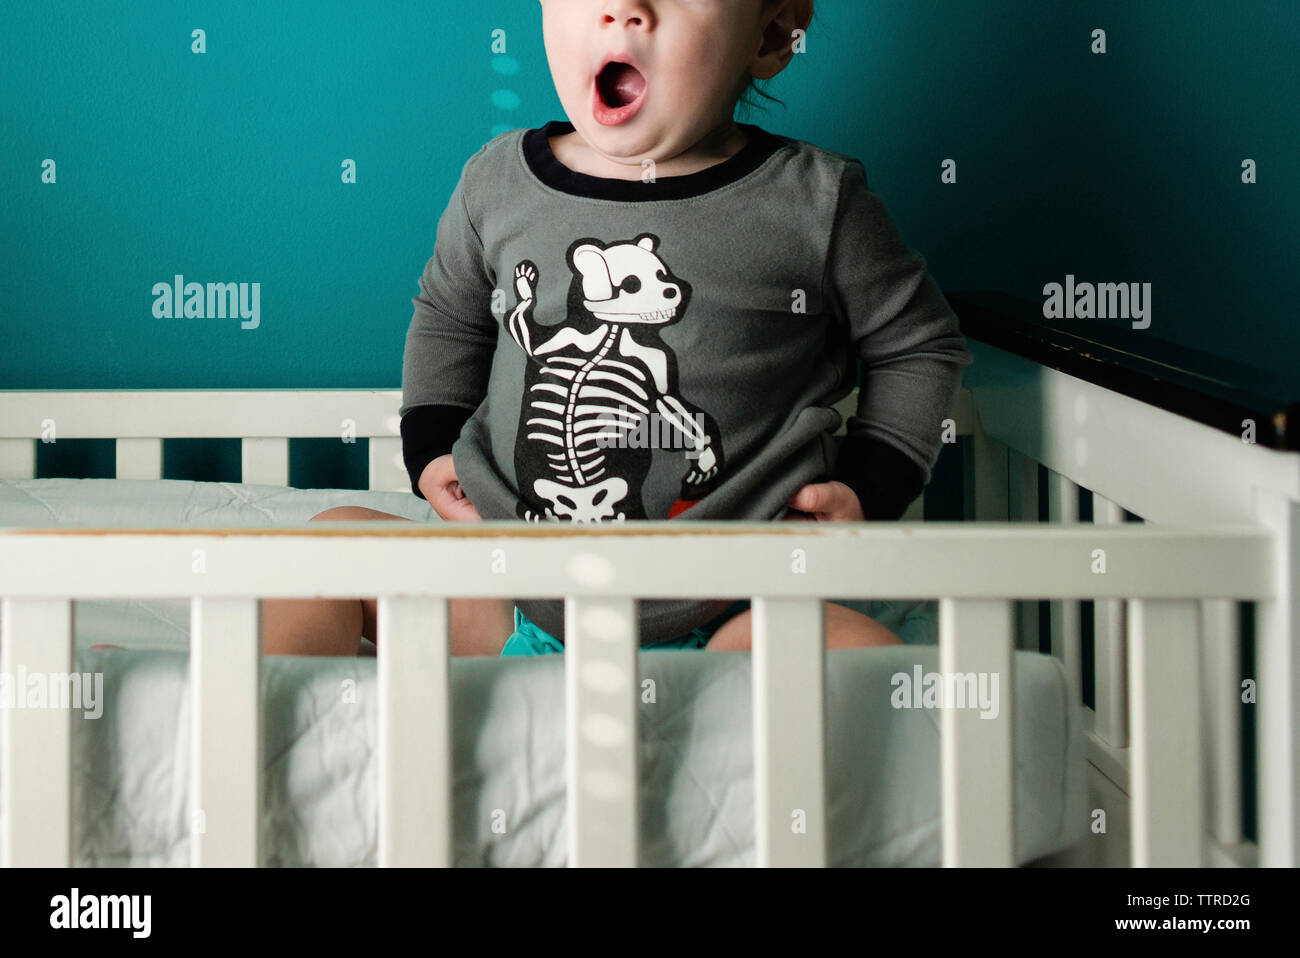 Midsection of boy yawning while sitting in bunkbed Stock Photo